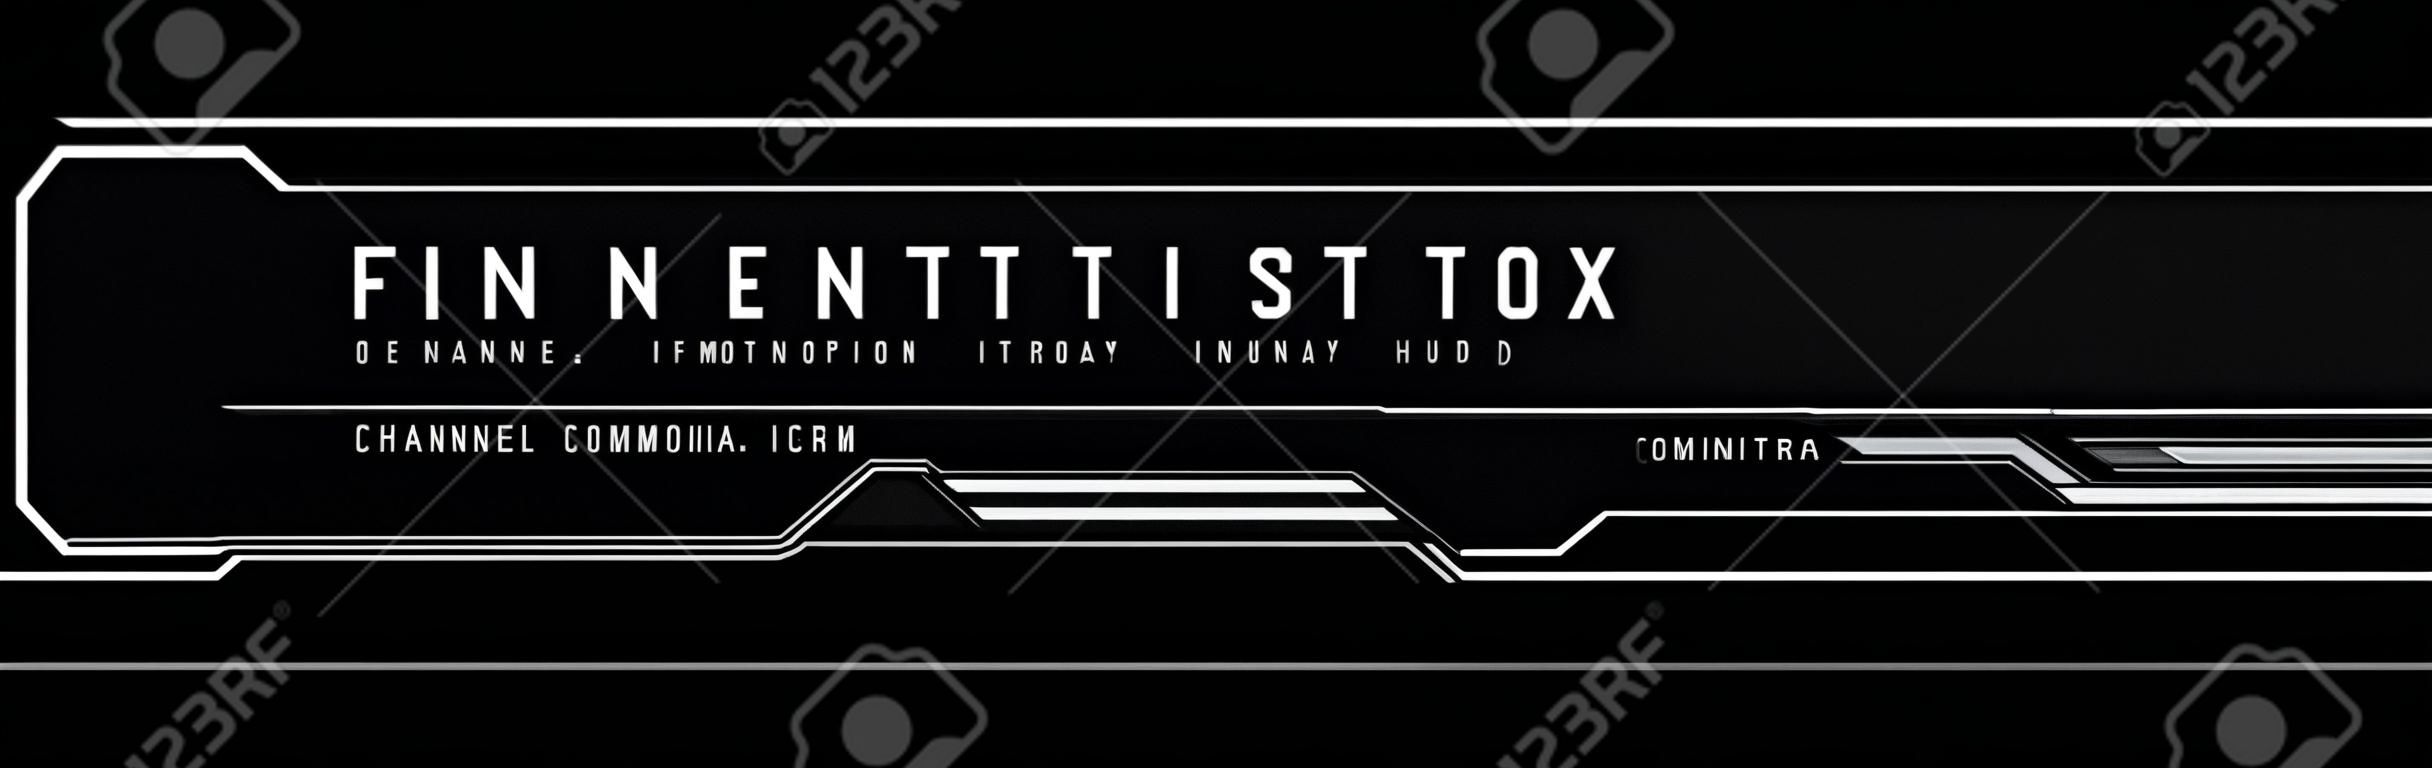 Futuristic lower third. Sci-fi design template for channel, news, information call box bars and modern digital info boxes. Element of hud interface. Modern information callouts. Vector illustration.